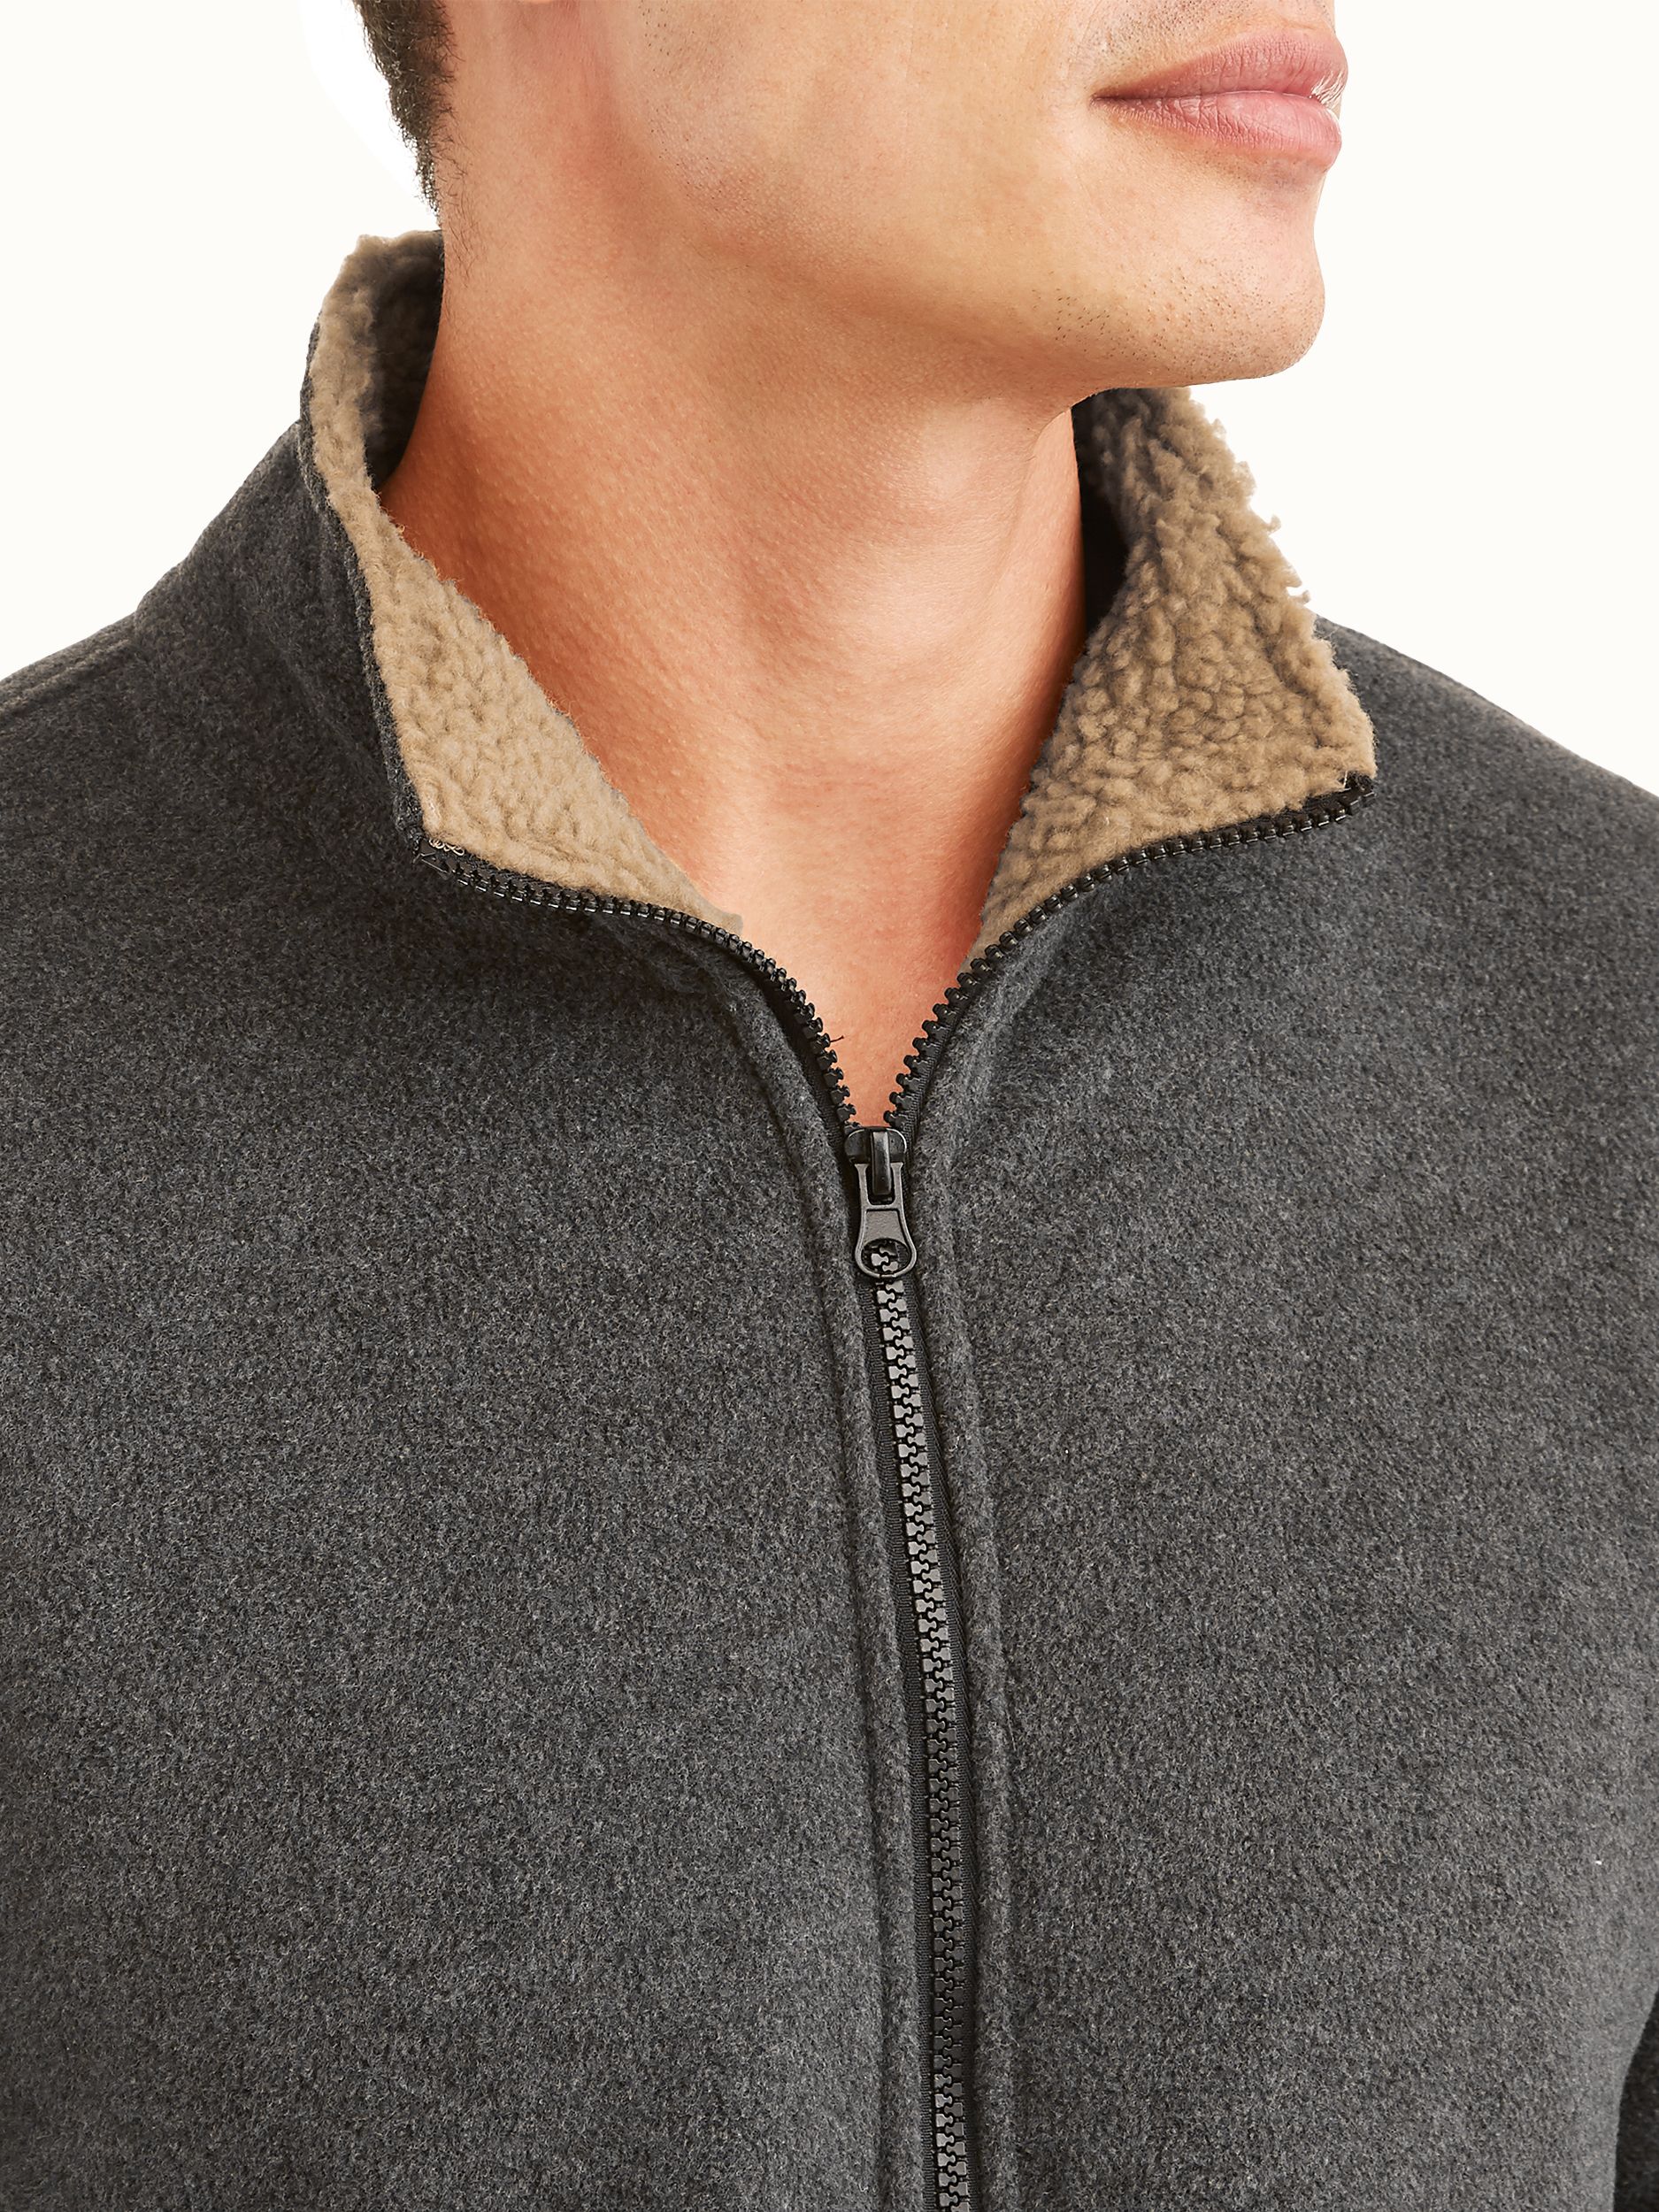 Climate Concepts Men's Heavy Weight Full Zip Artic Fleece Jacket with Sherpa Lining, up to Size 5Xl - image 4 of 4